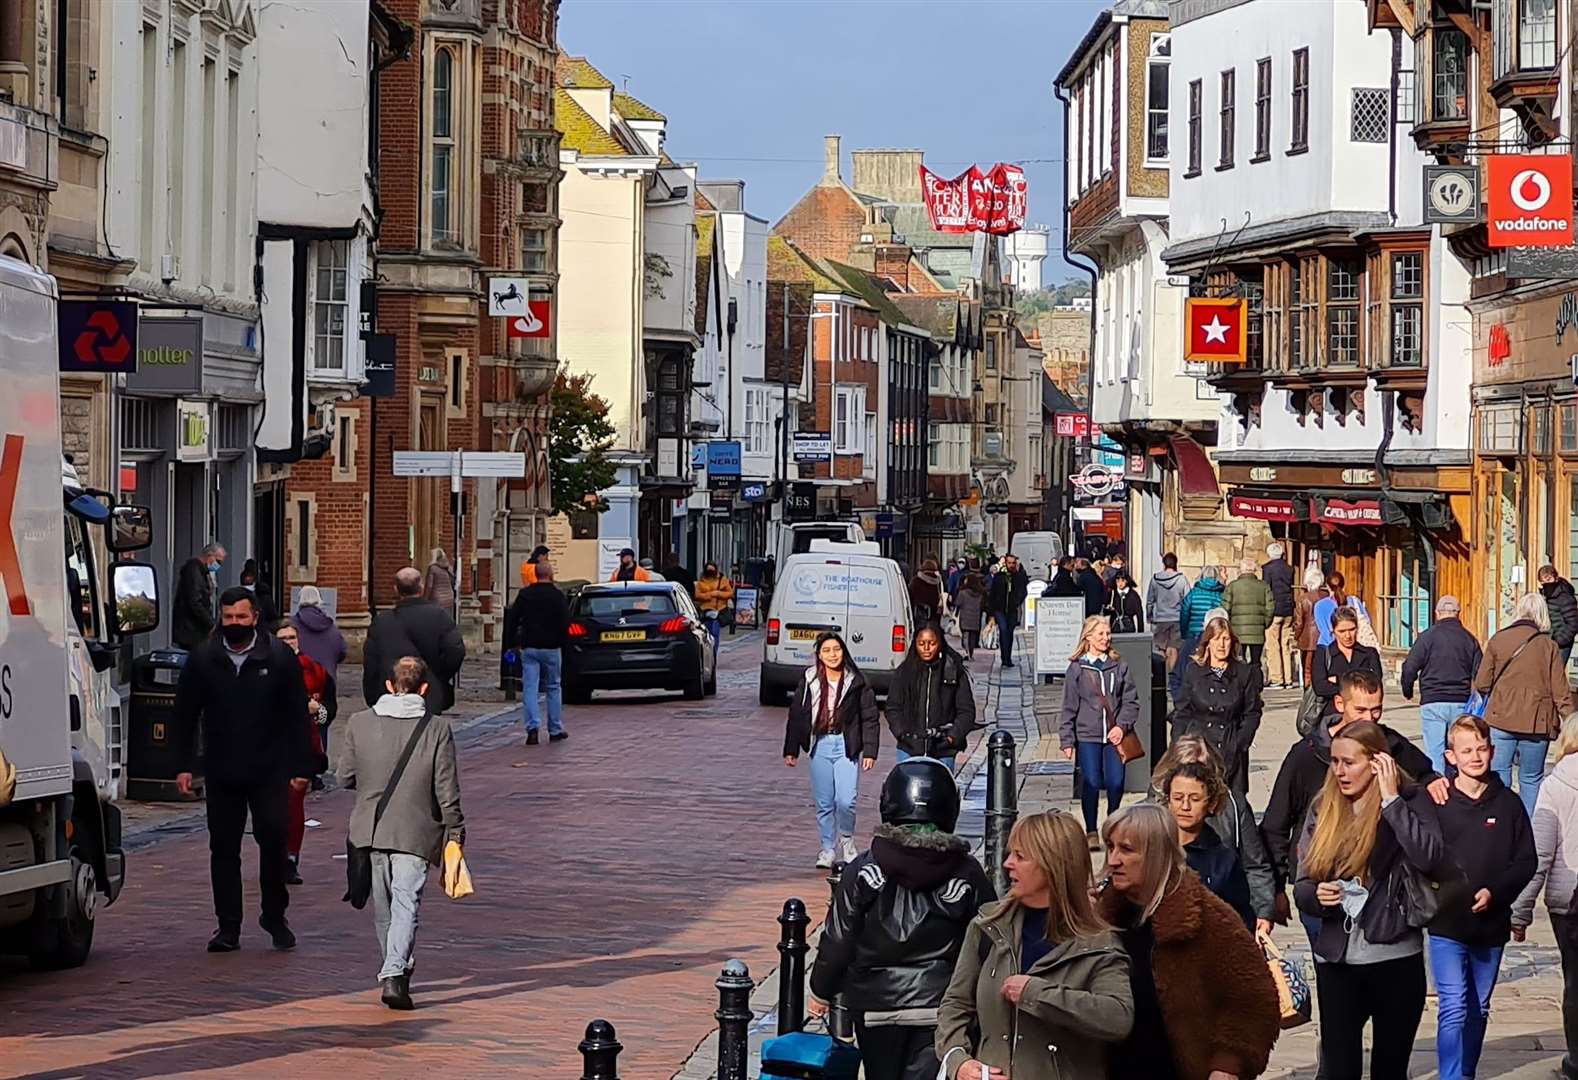 Canterbury City Council says the issue of beggars harassing and intimidating shoppers in the high street is becoming more prevalent